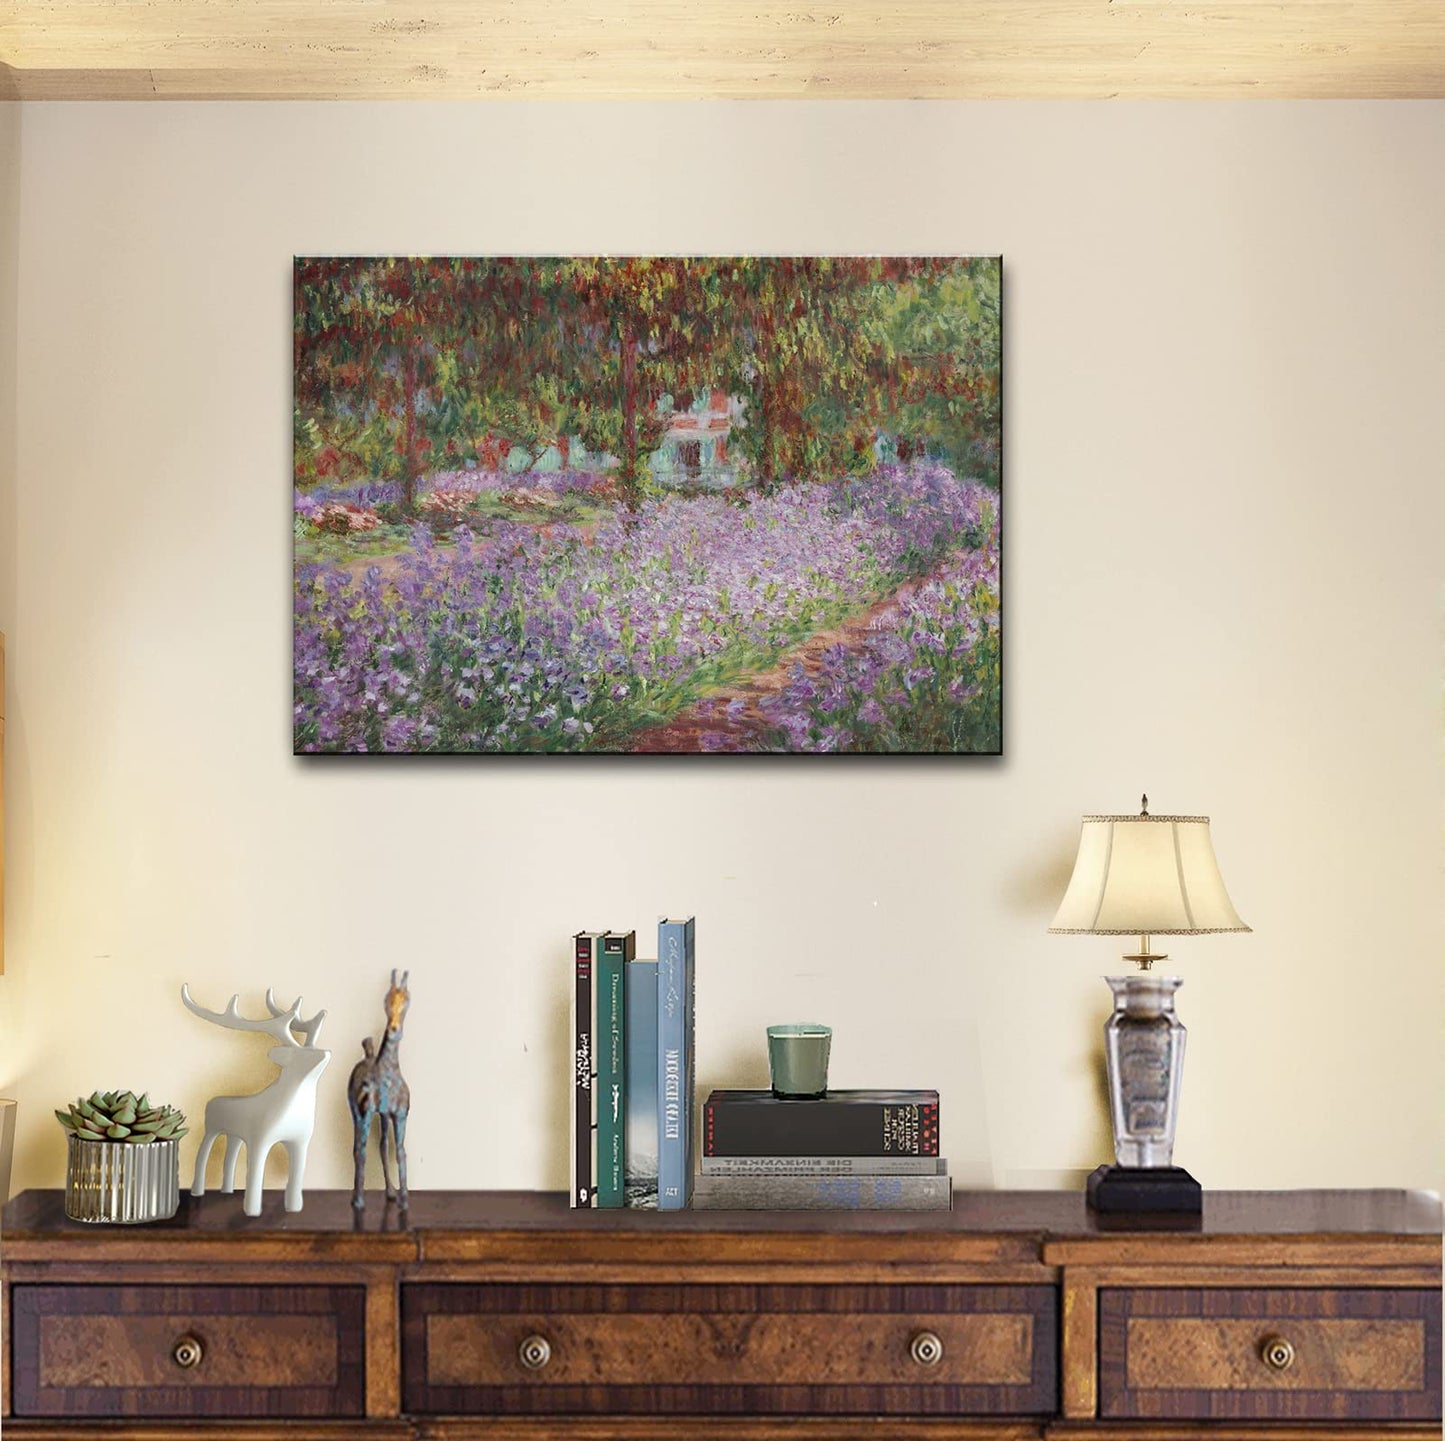 Irises in Monet's Garden, 1900 by Claude Monet - Large Canvas Art Wall Decor Painting Print Framed -24" x 36"